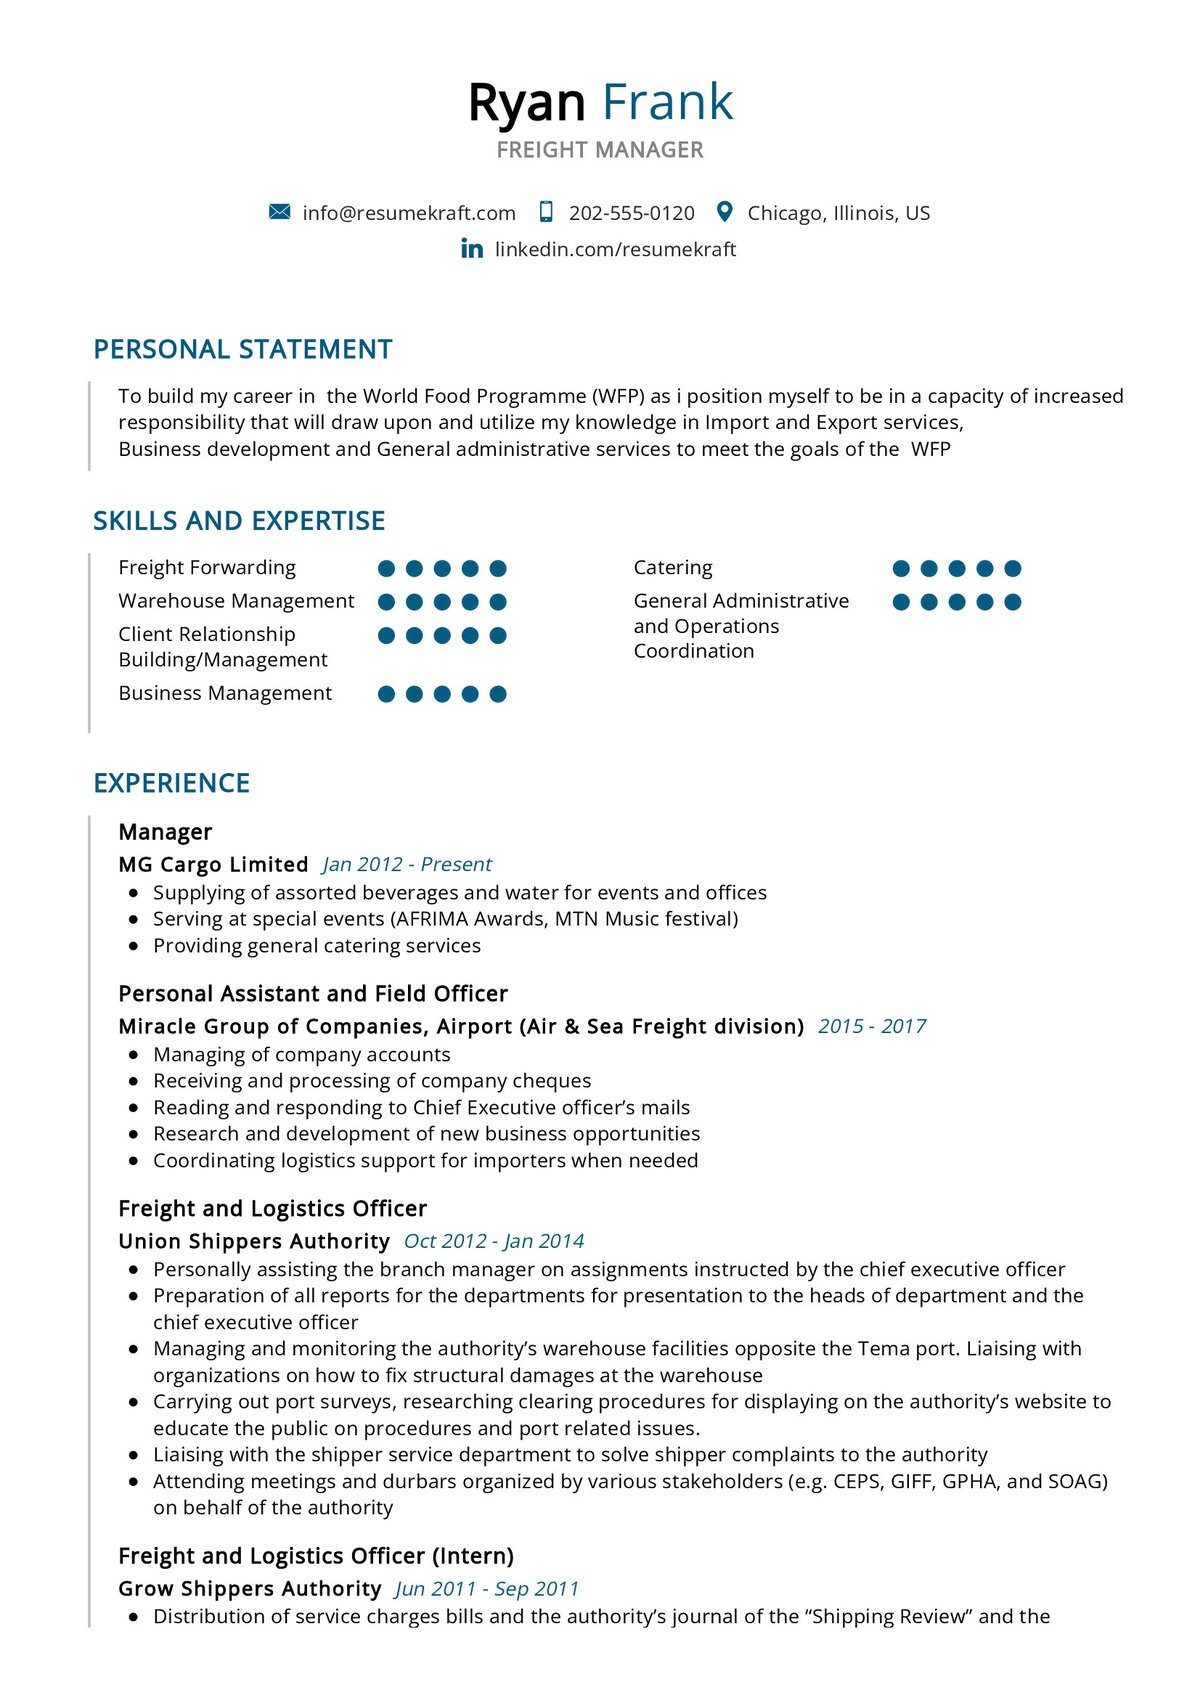 Sample Resume for Shipping and Receiving Manager Freight Manager Resume Example 2022 Writing Tips – Resumekraft